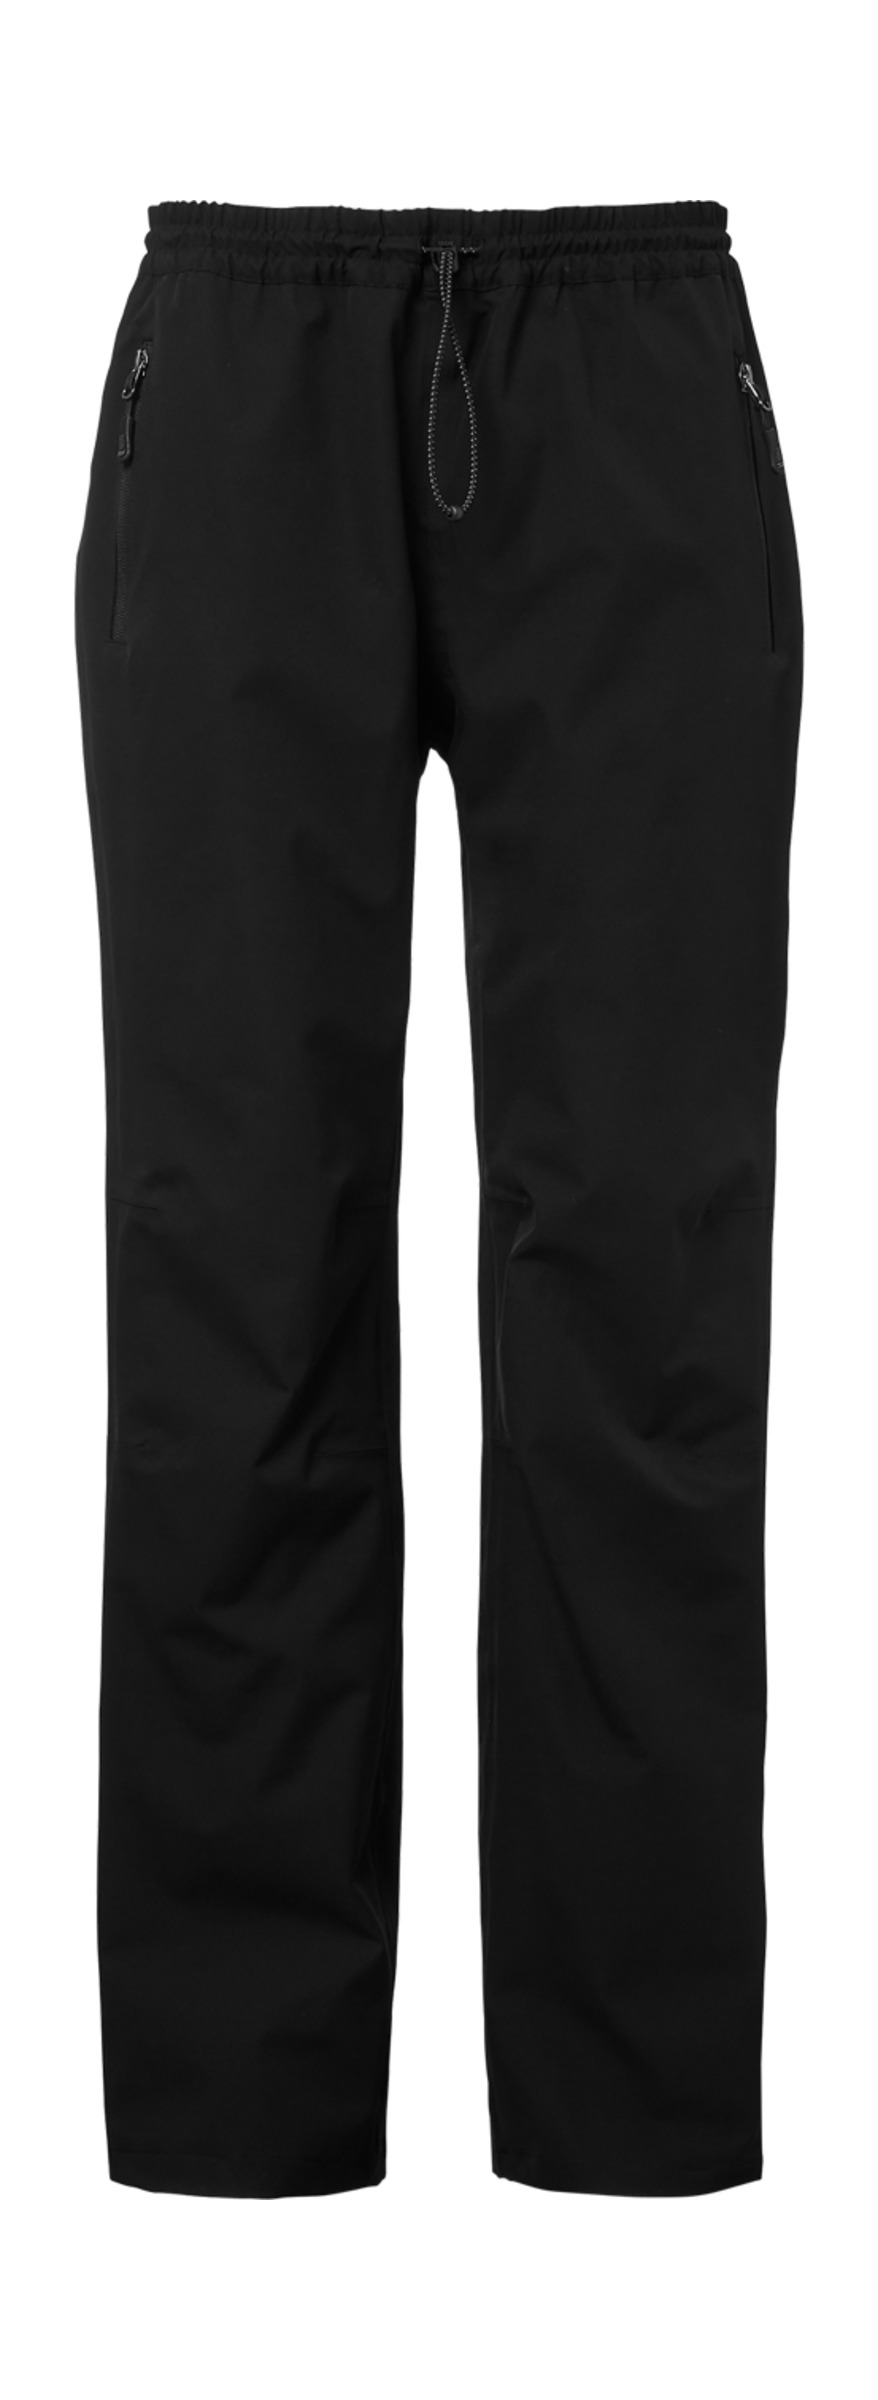 South West Disa Shell Trousers w